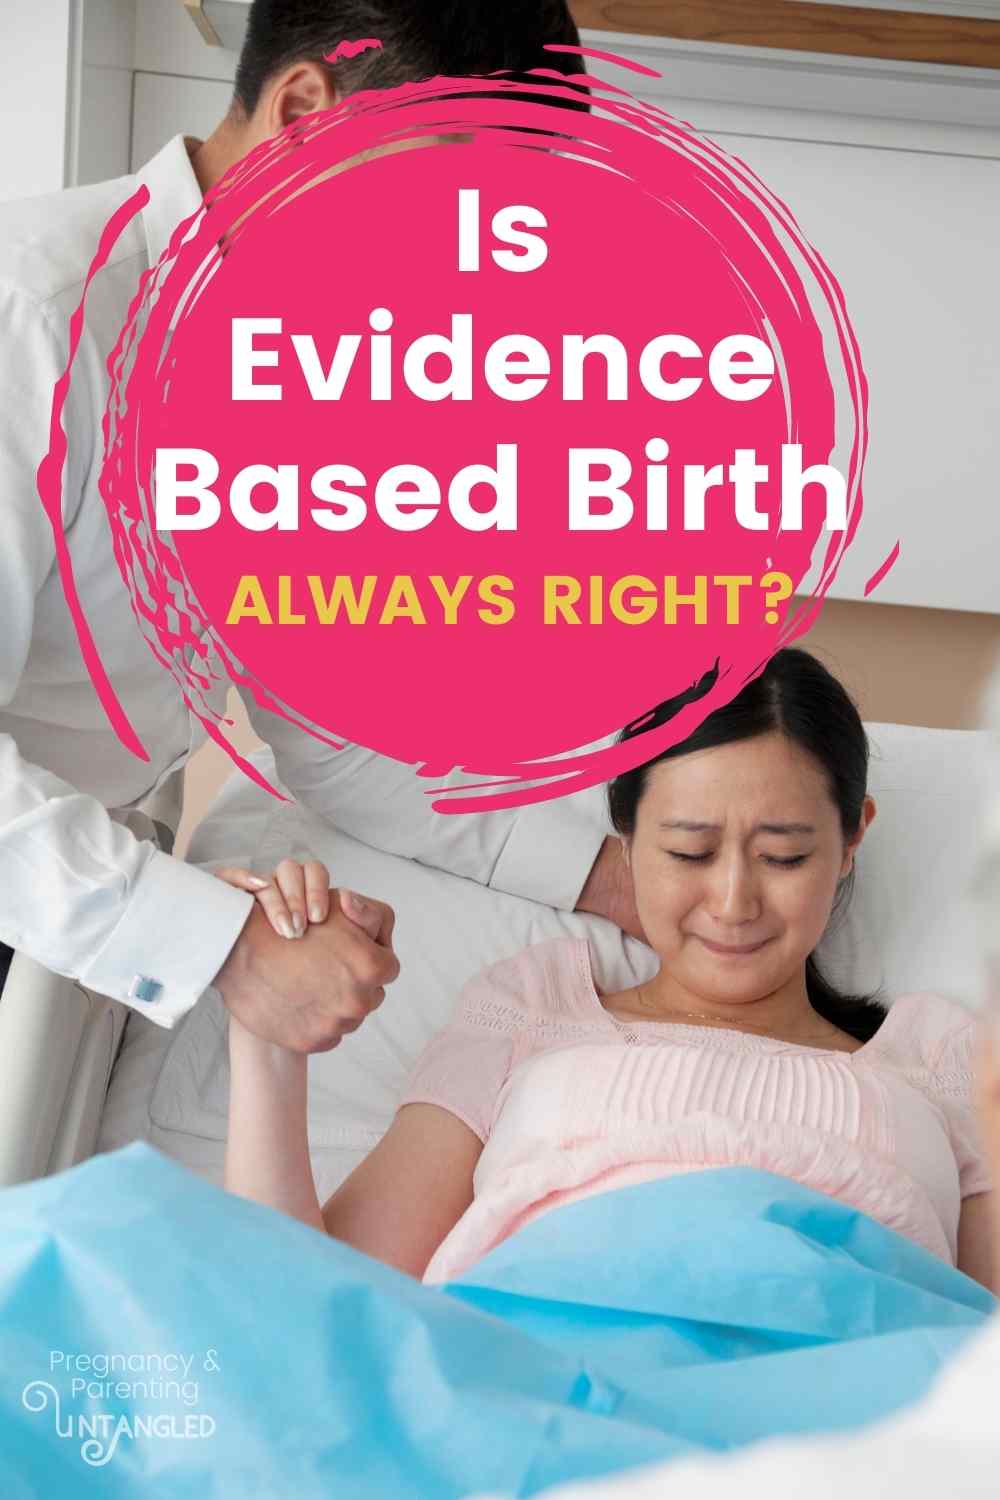 Evidence Based Birth is a great advancement in labor nursing, but all too often I hear "the evidence doesn't support that" and I get frustrated. Today we're talking about what evidence based birth DOESN'T take into account, so you can more fully understand your prenatal care. via @pullingcurls